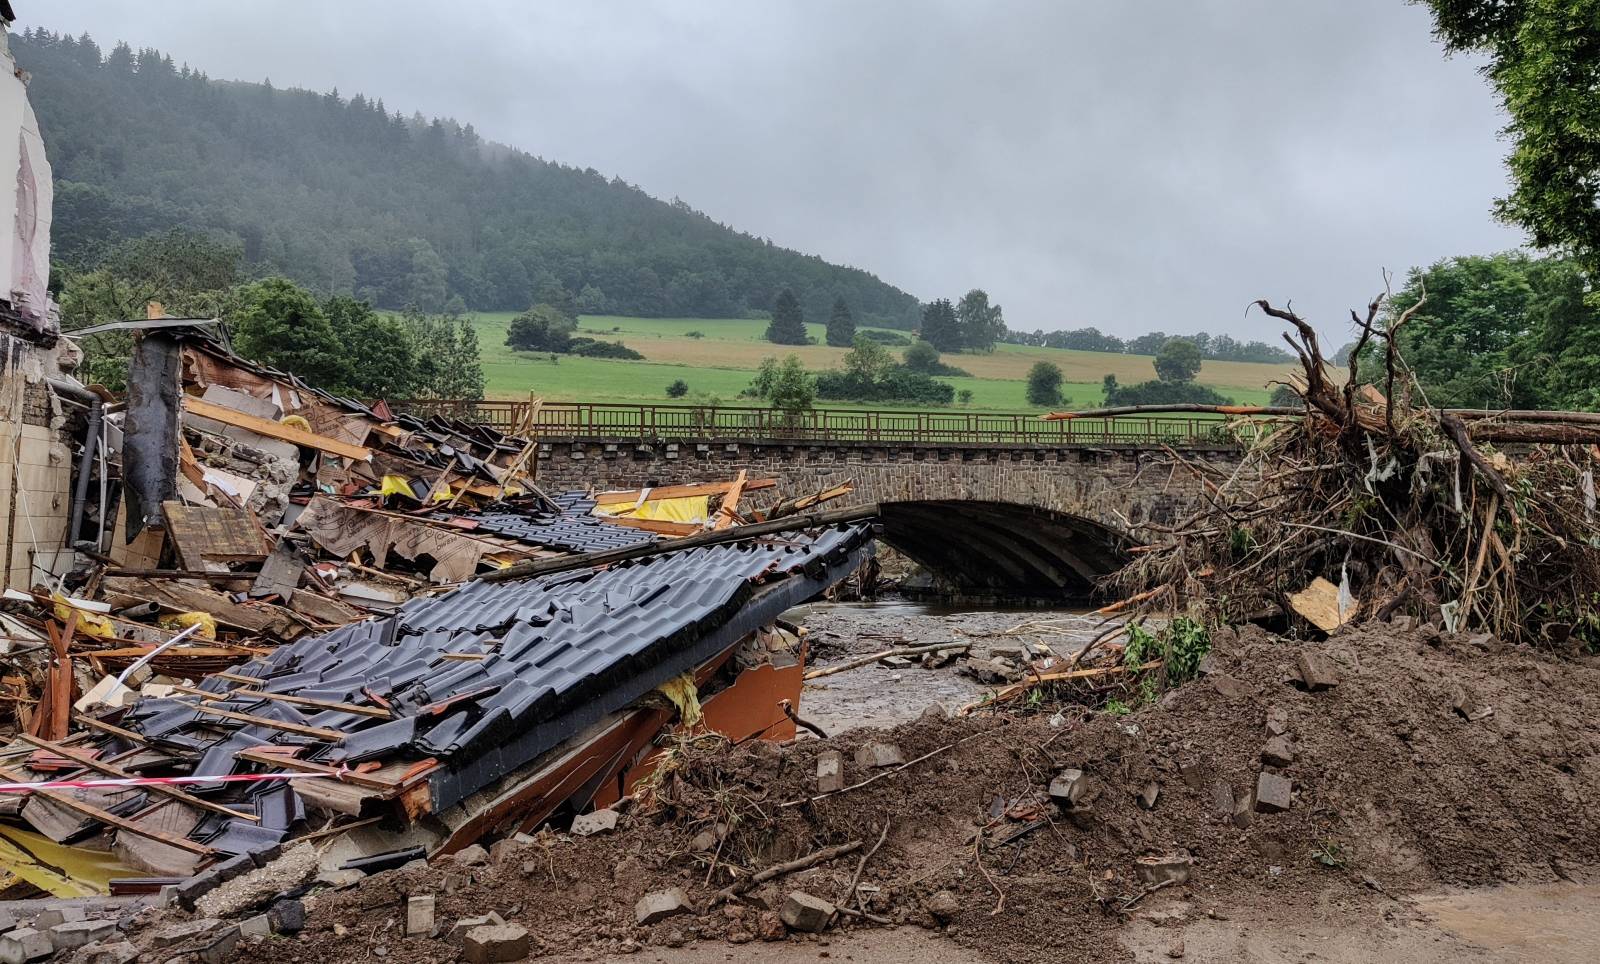 A collapsed building is pictured after a flood in Schuld